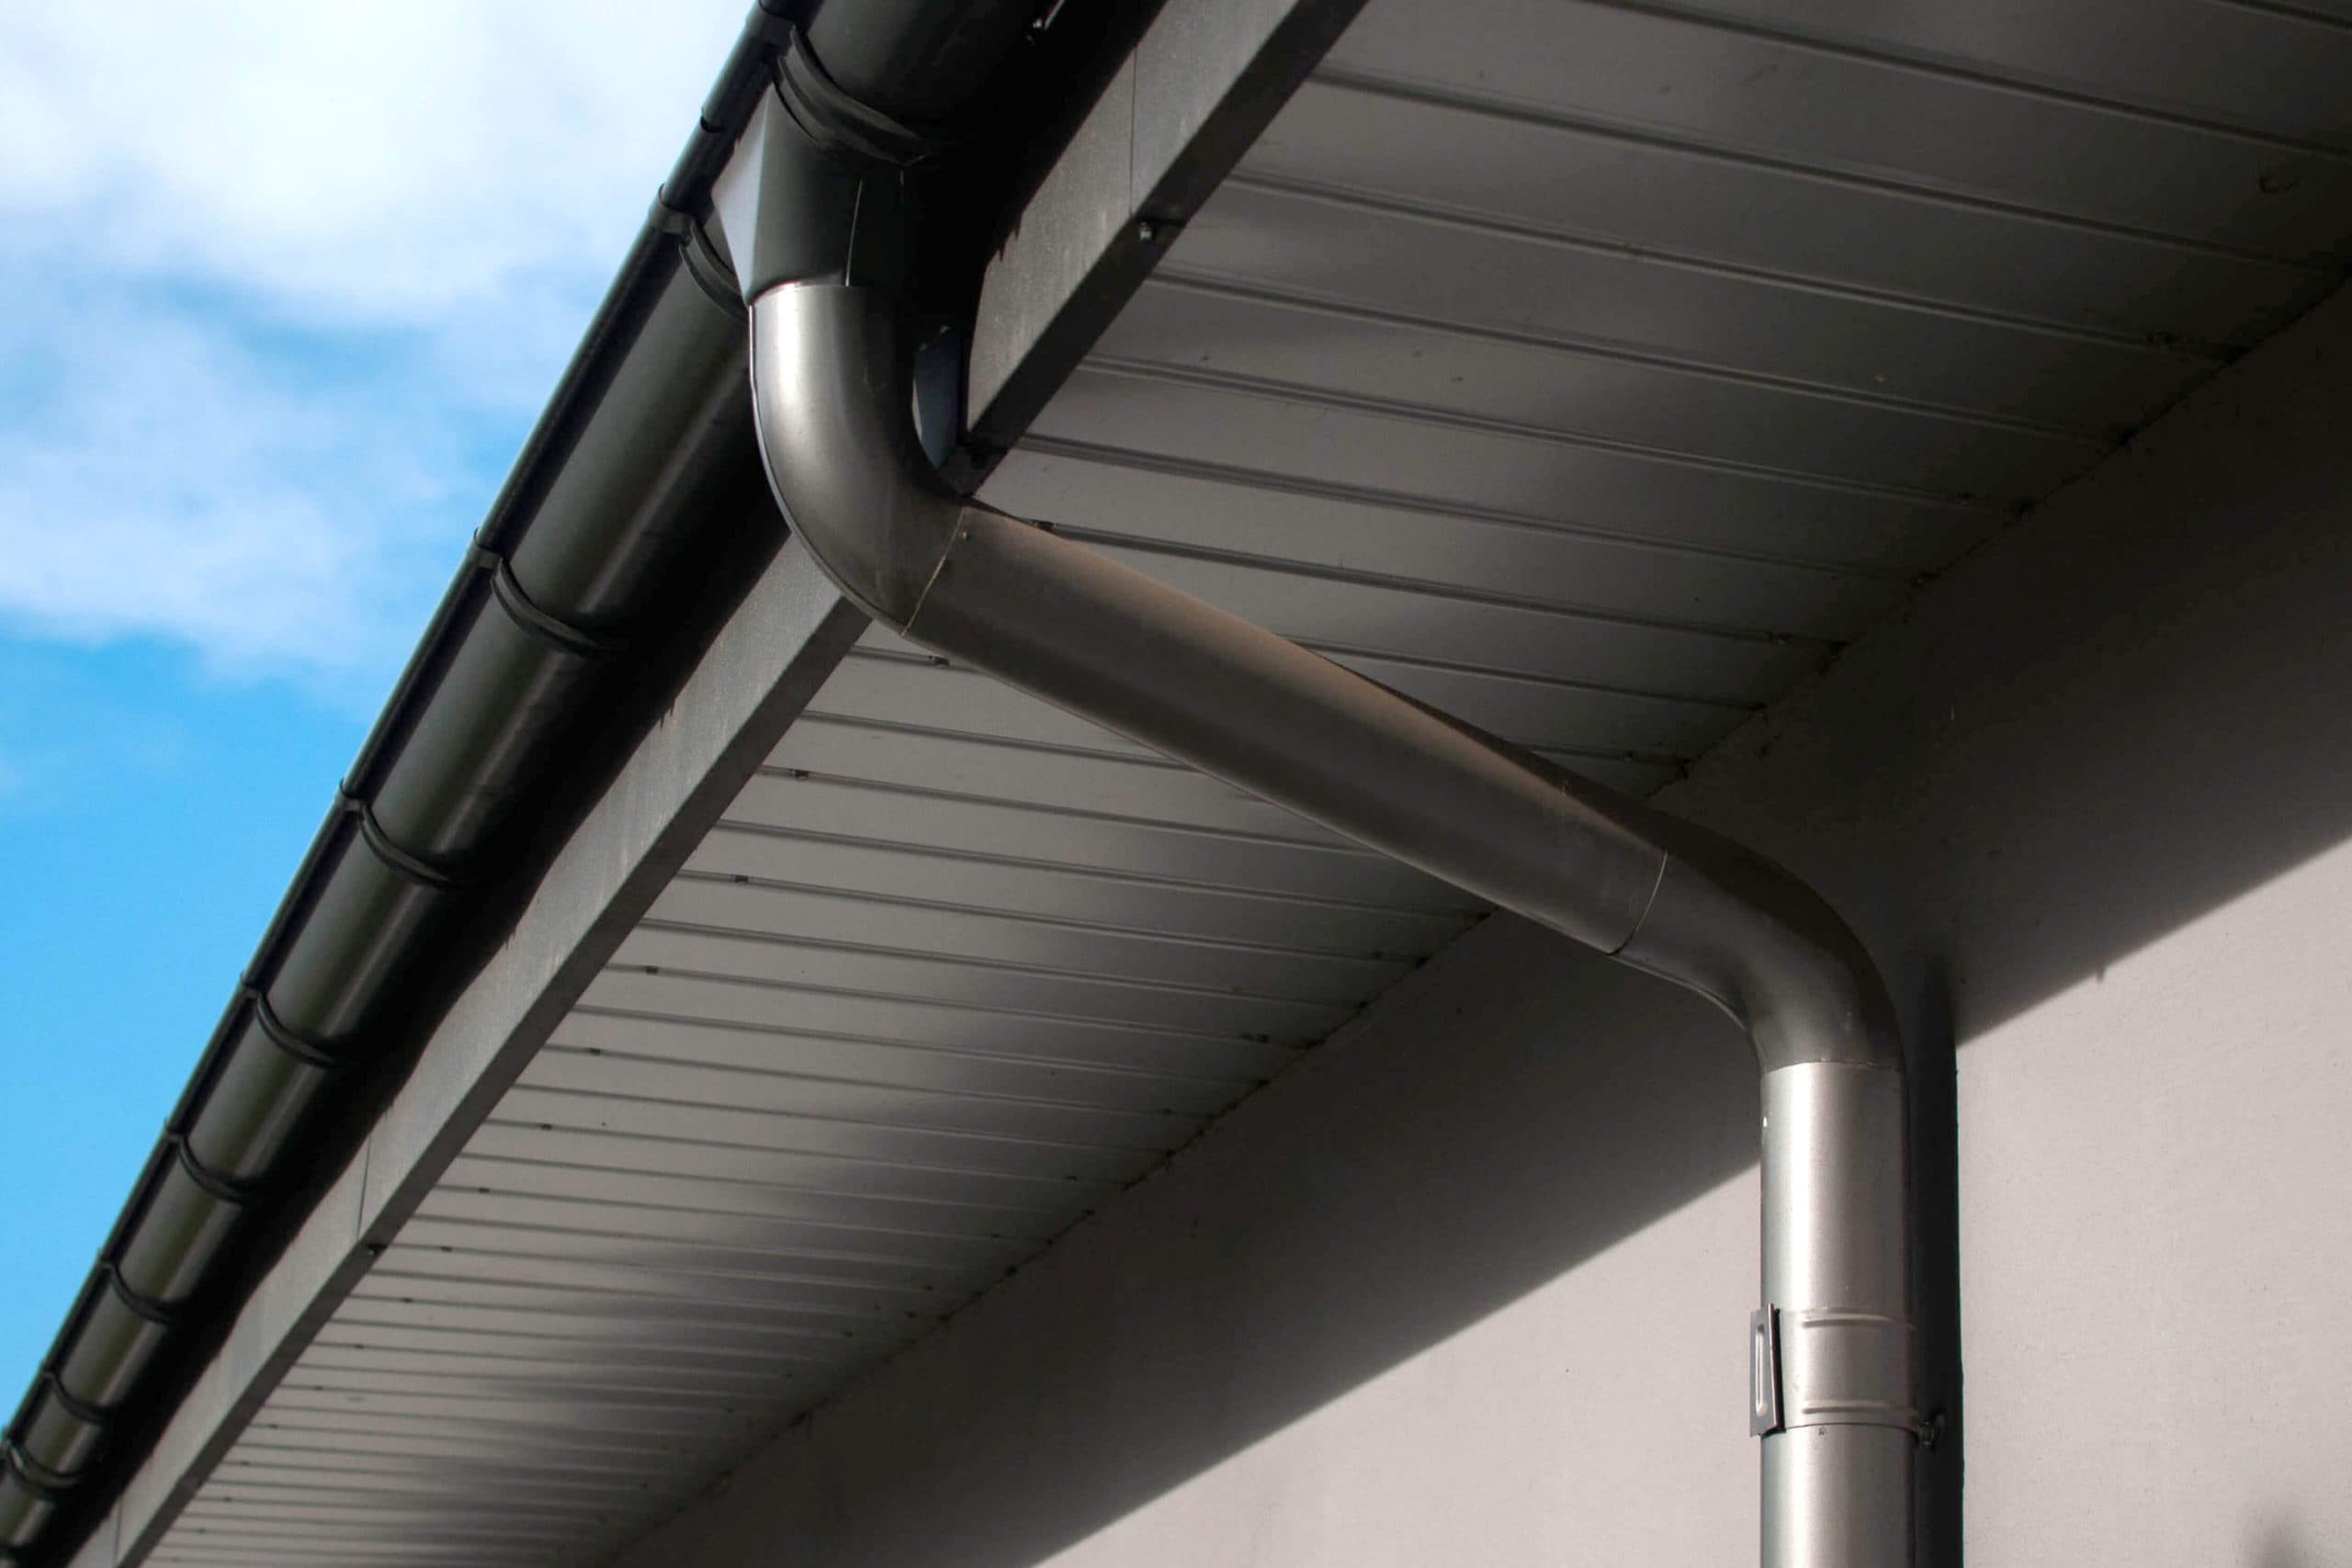 Reliable and affordable Galvanized gutters installation in Little Rock